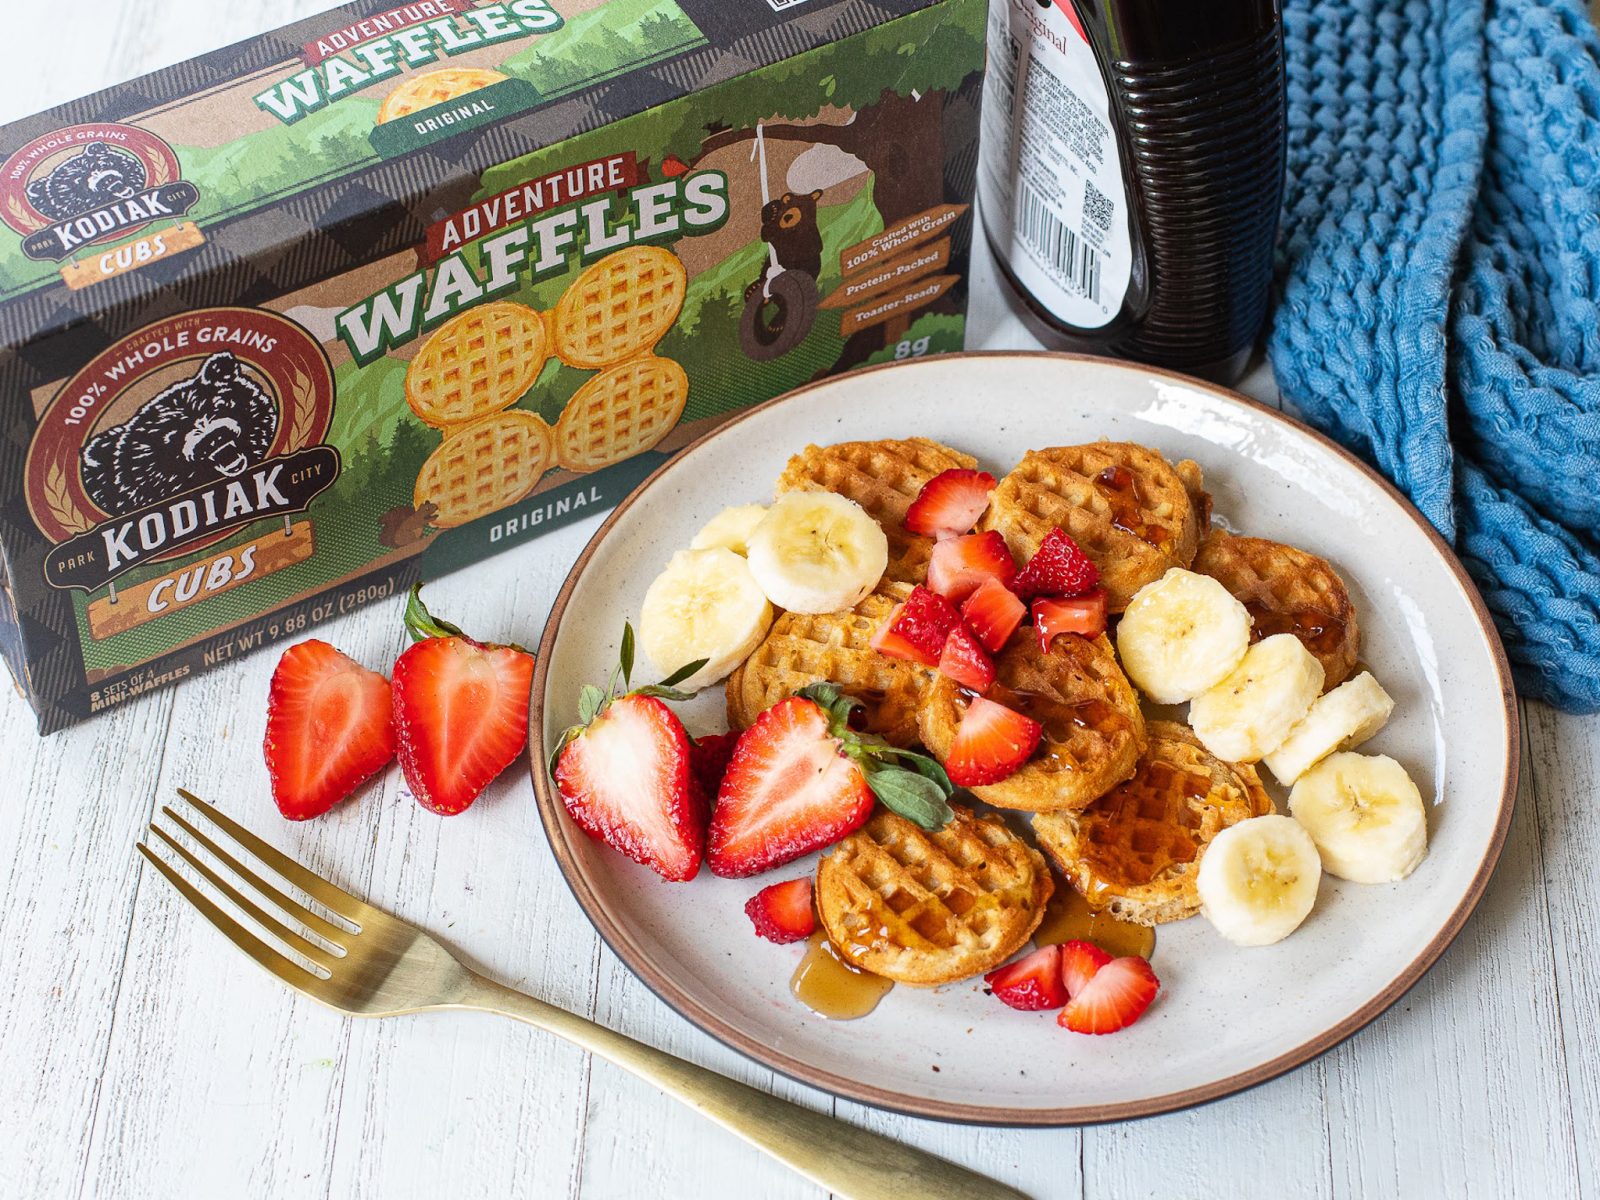 Kodiak Thick & Fluffy or Adventure Waffles As Low As $3.49 At Kroger